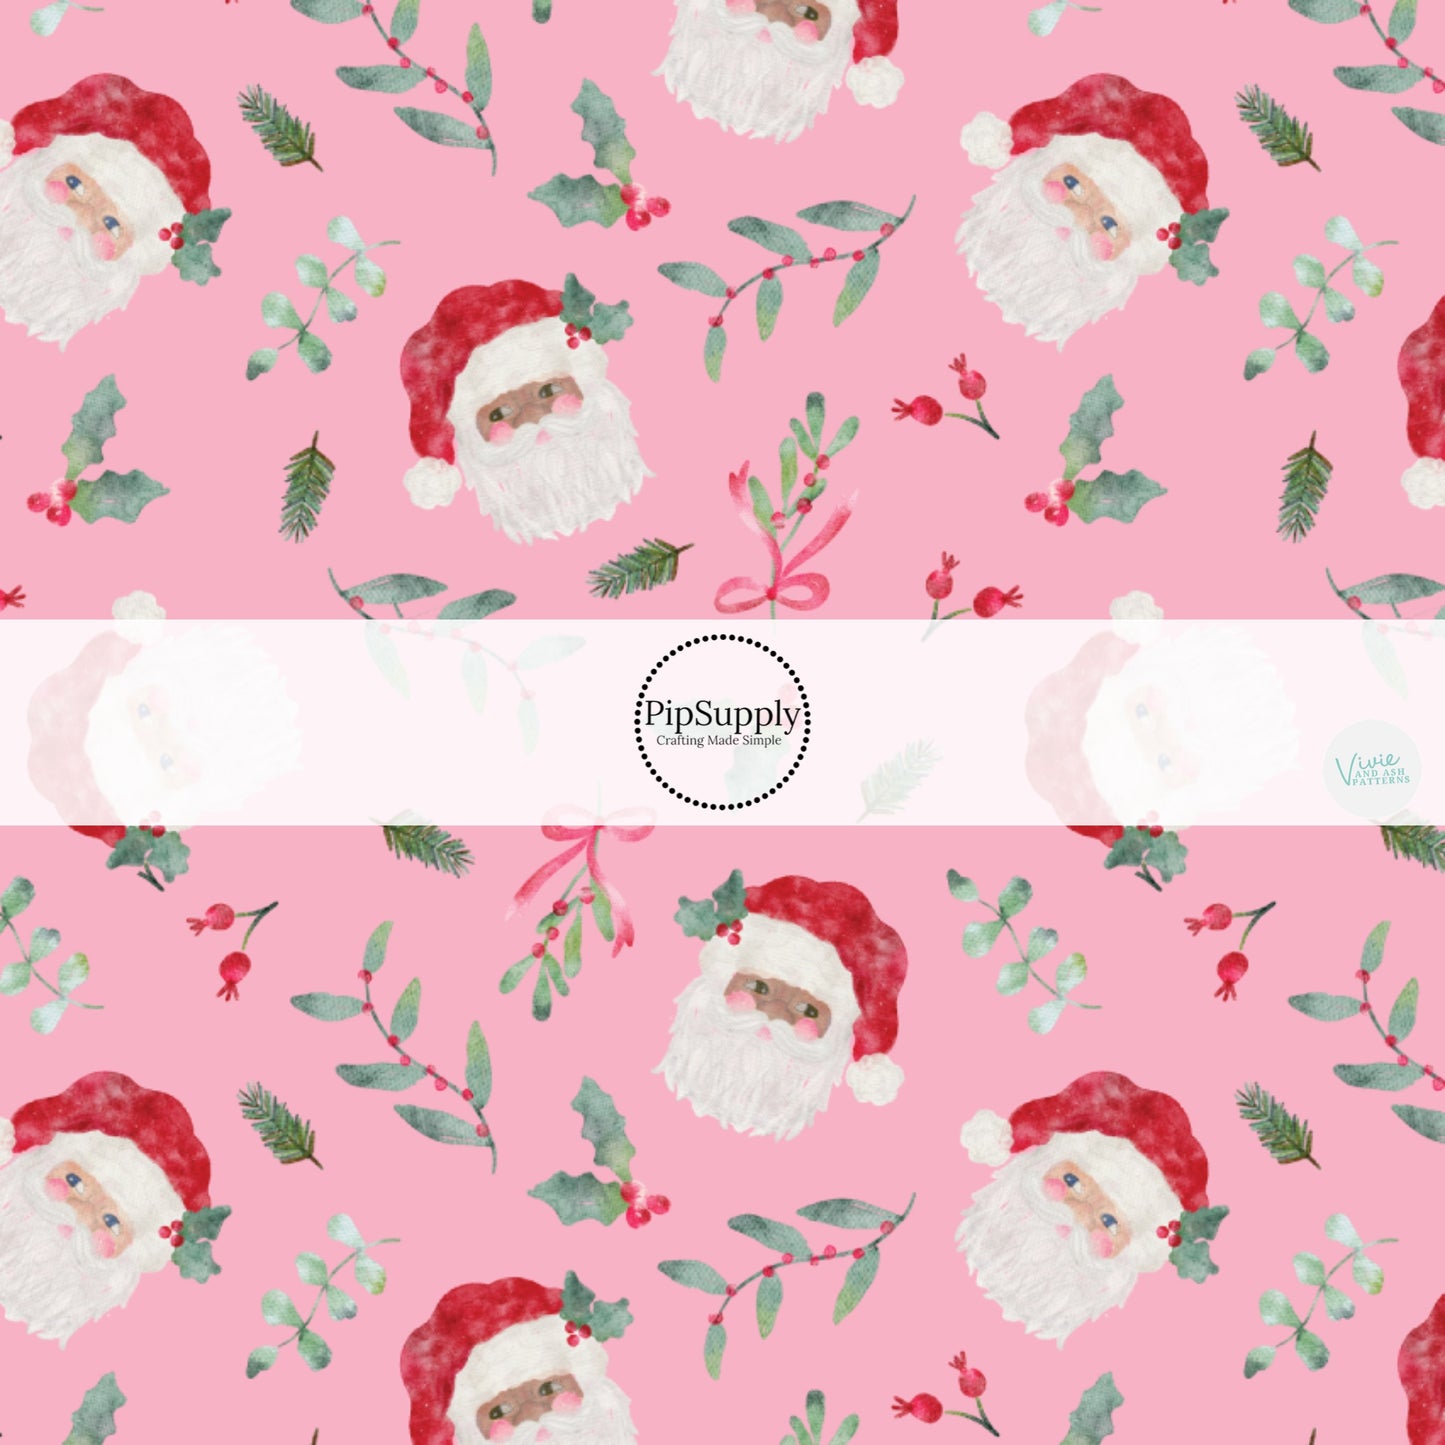 Pink fabric by the yard with mistletoe, holly leaves, and Santa Clause.